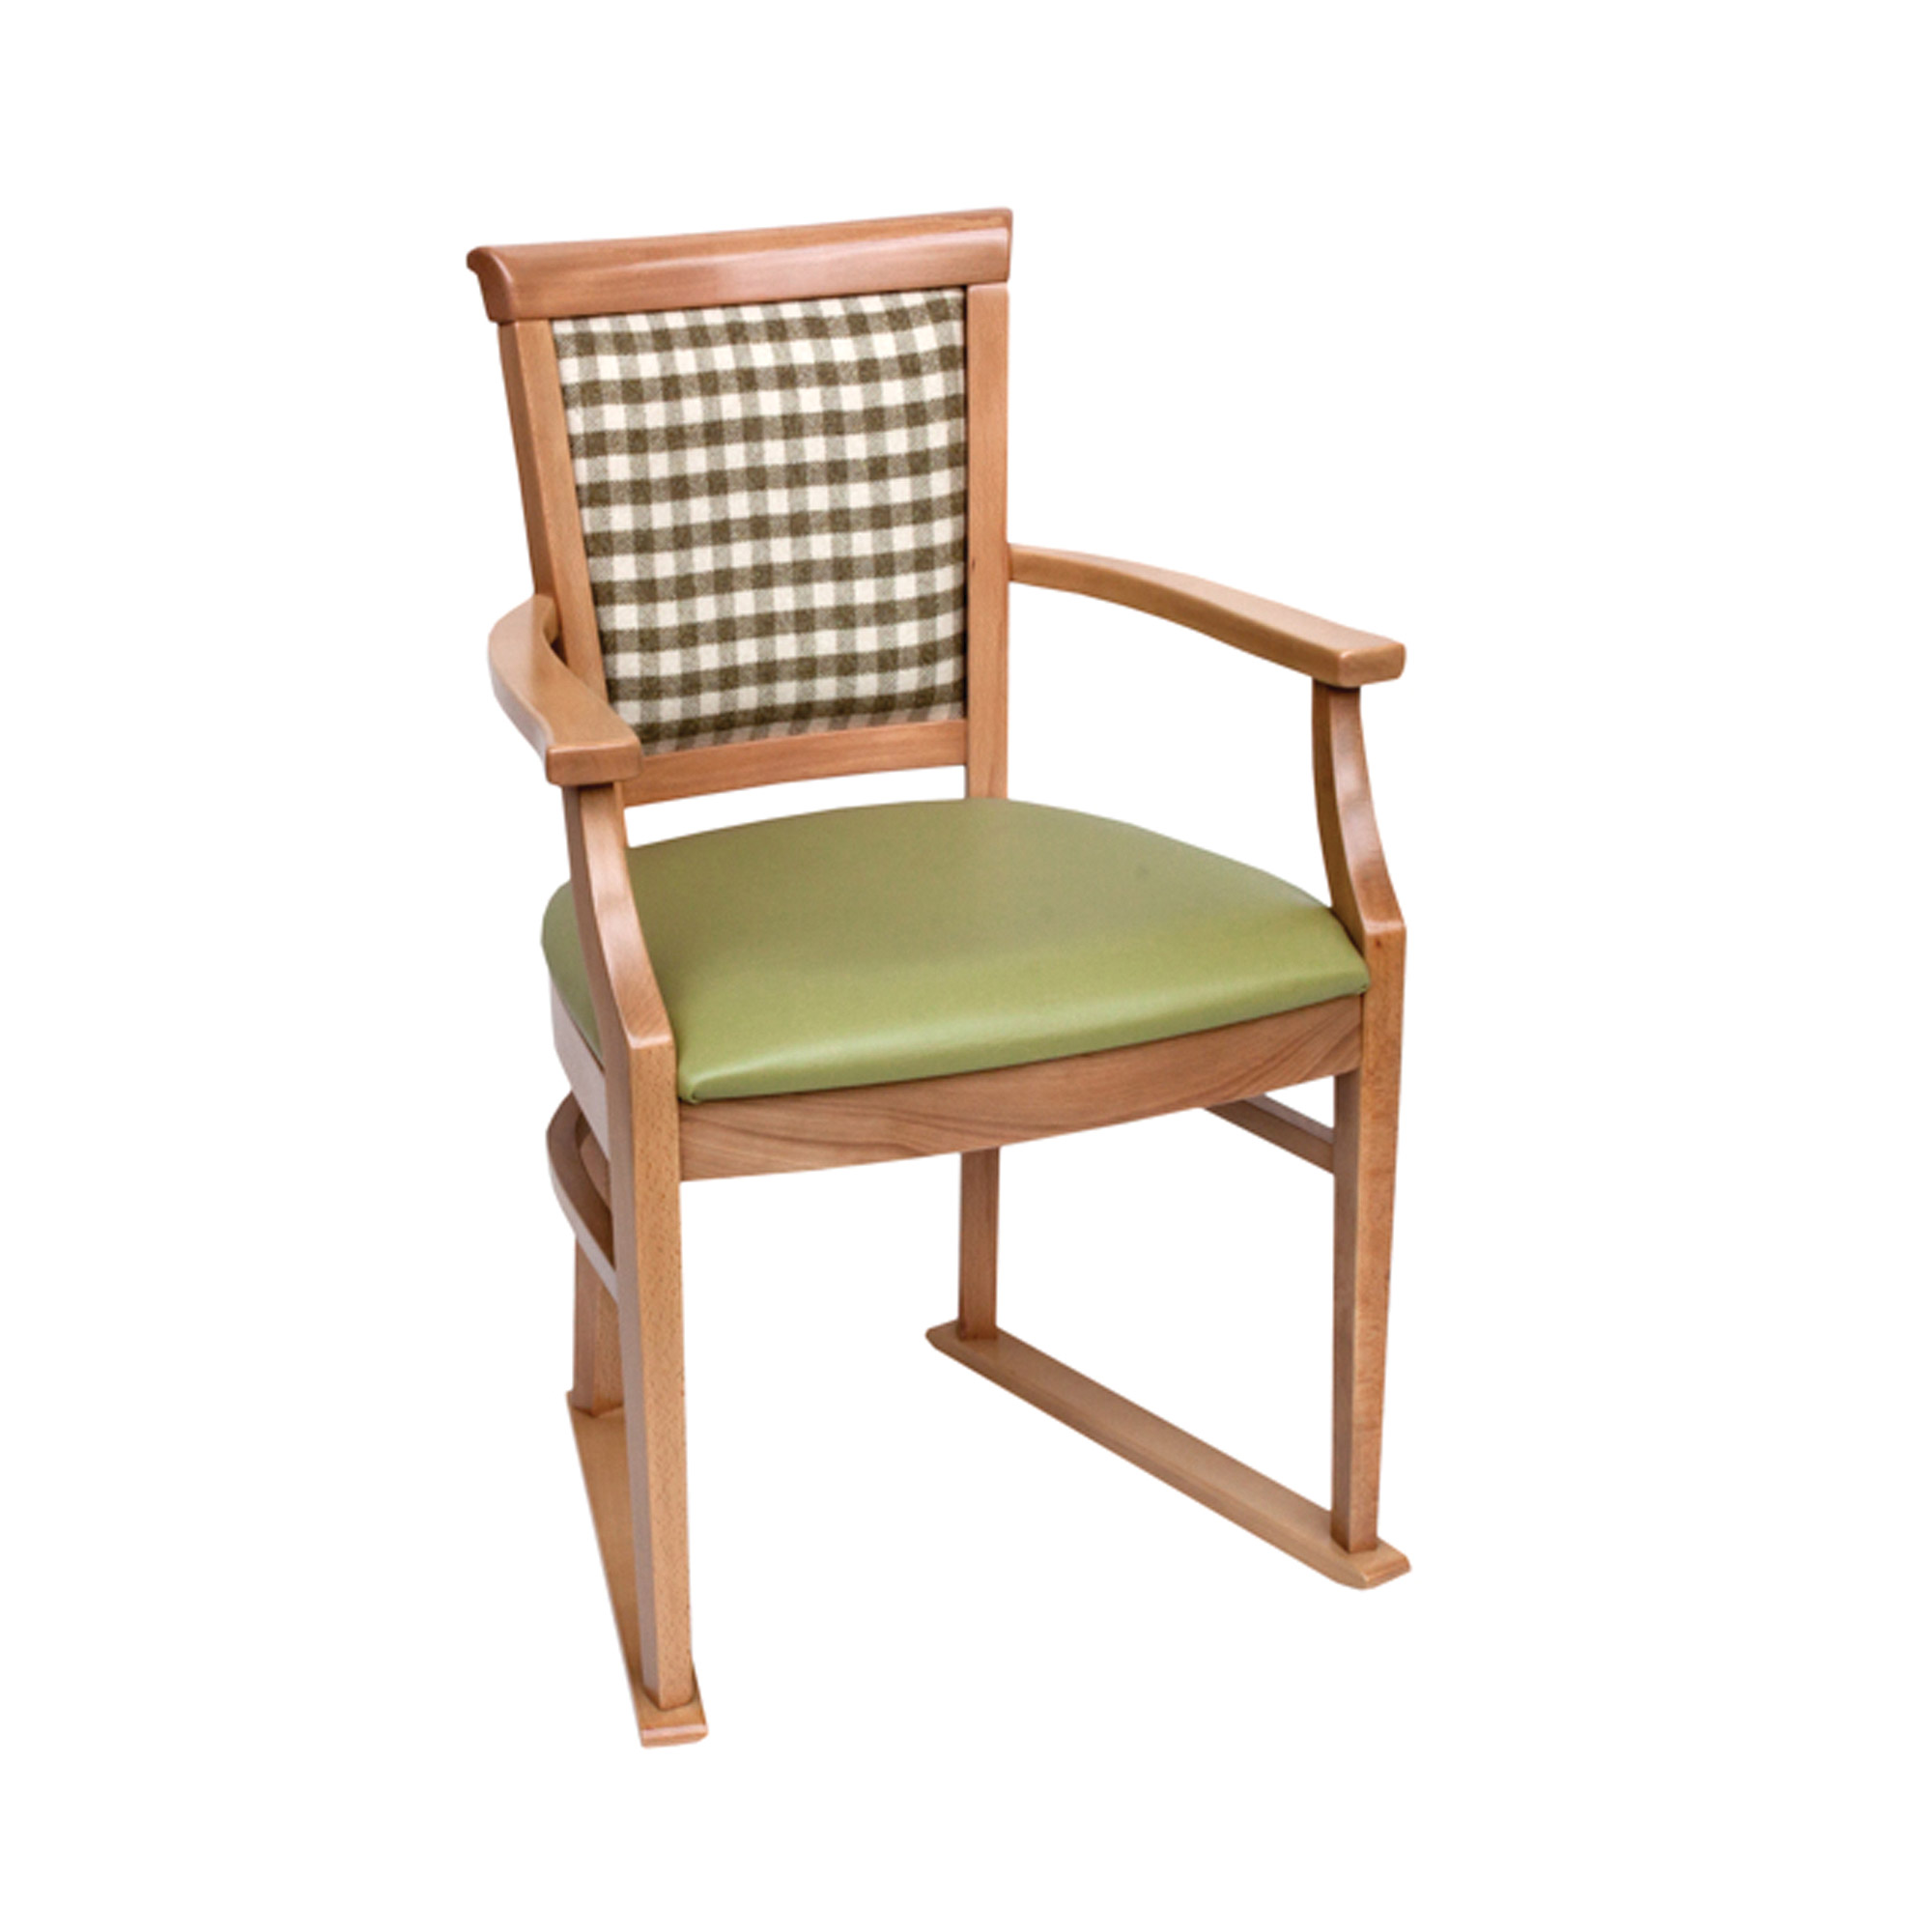 Irwin Chair with Arms and Skis B Range